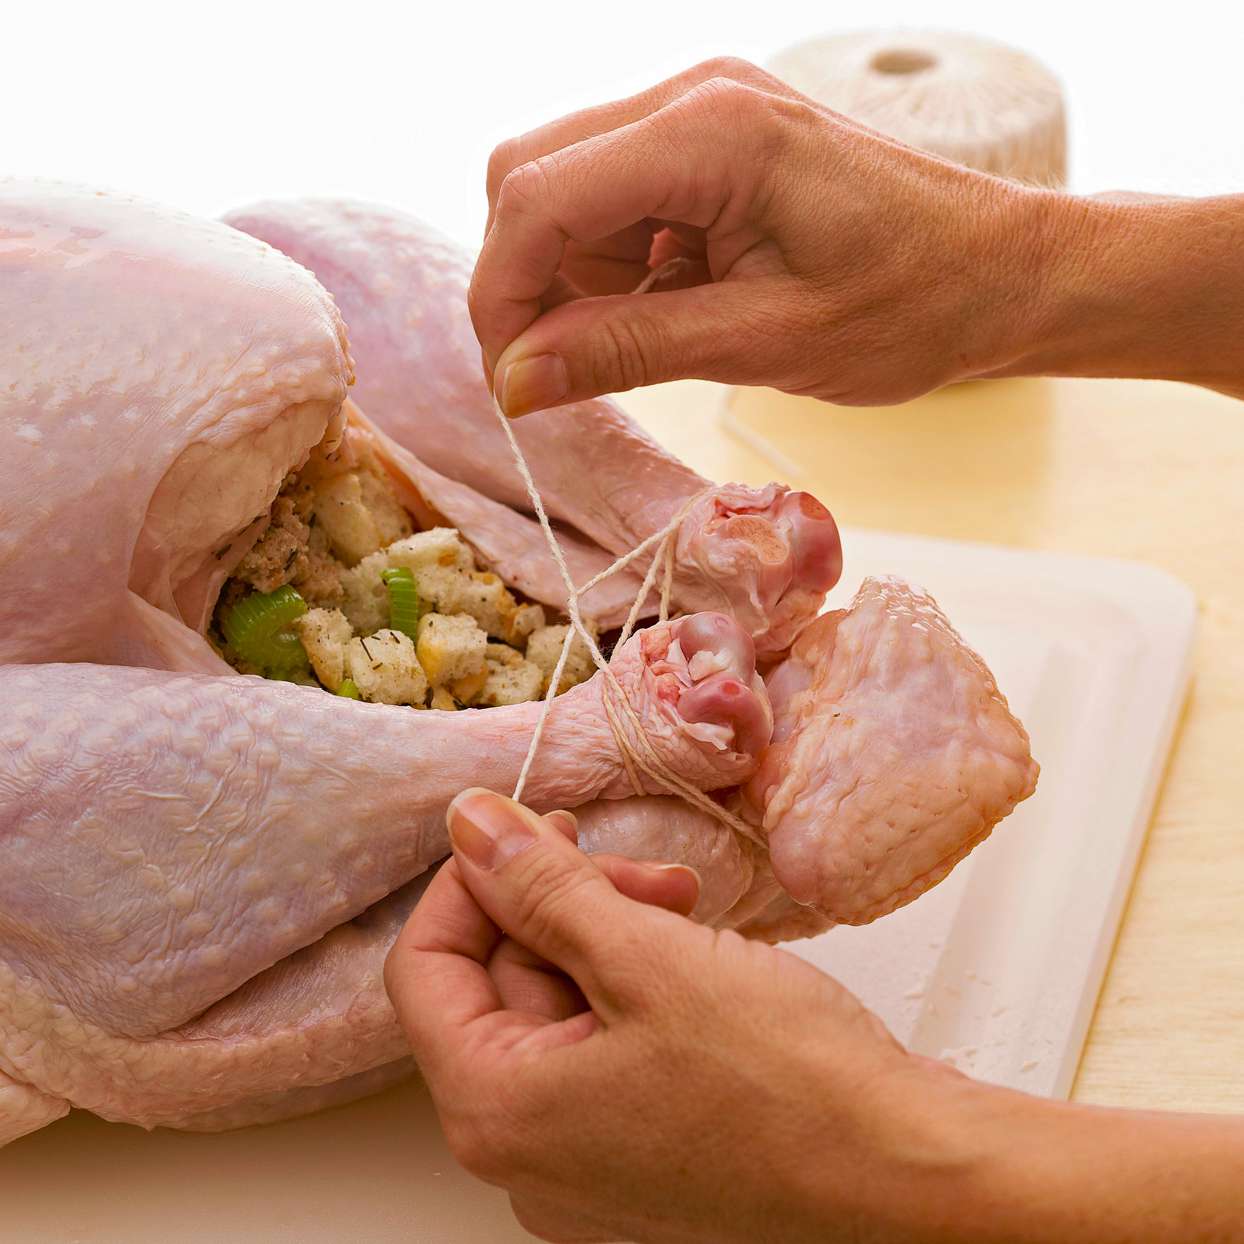 tying turkey legs together to hold in stuffing